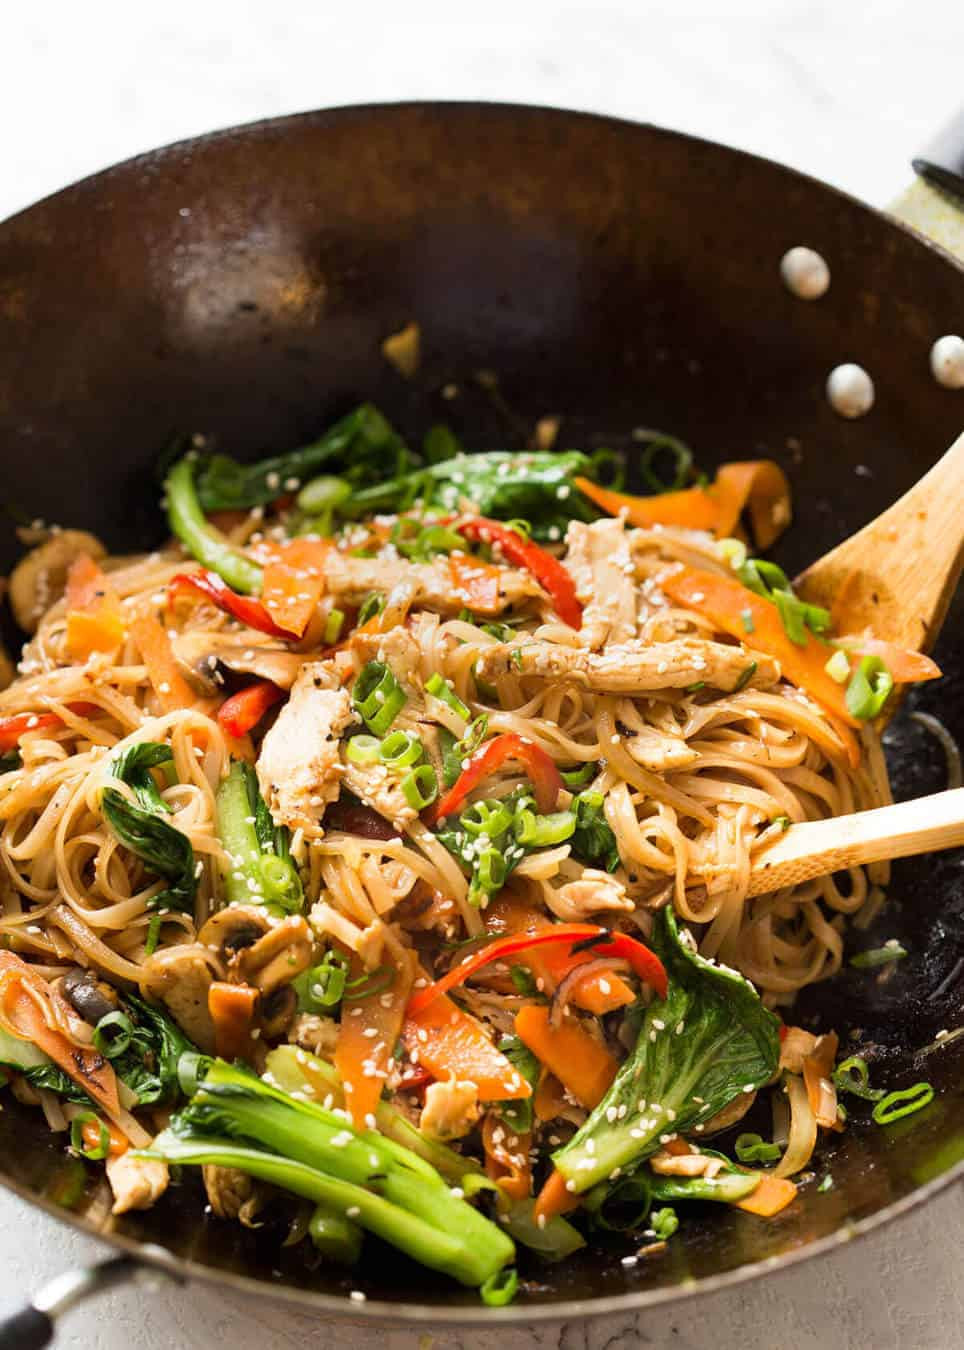 Make Rice Noodles
 Chicken Stir Fry with Rice Noodles